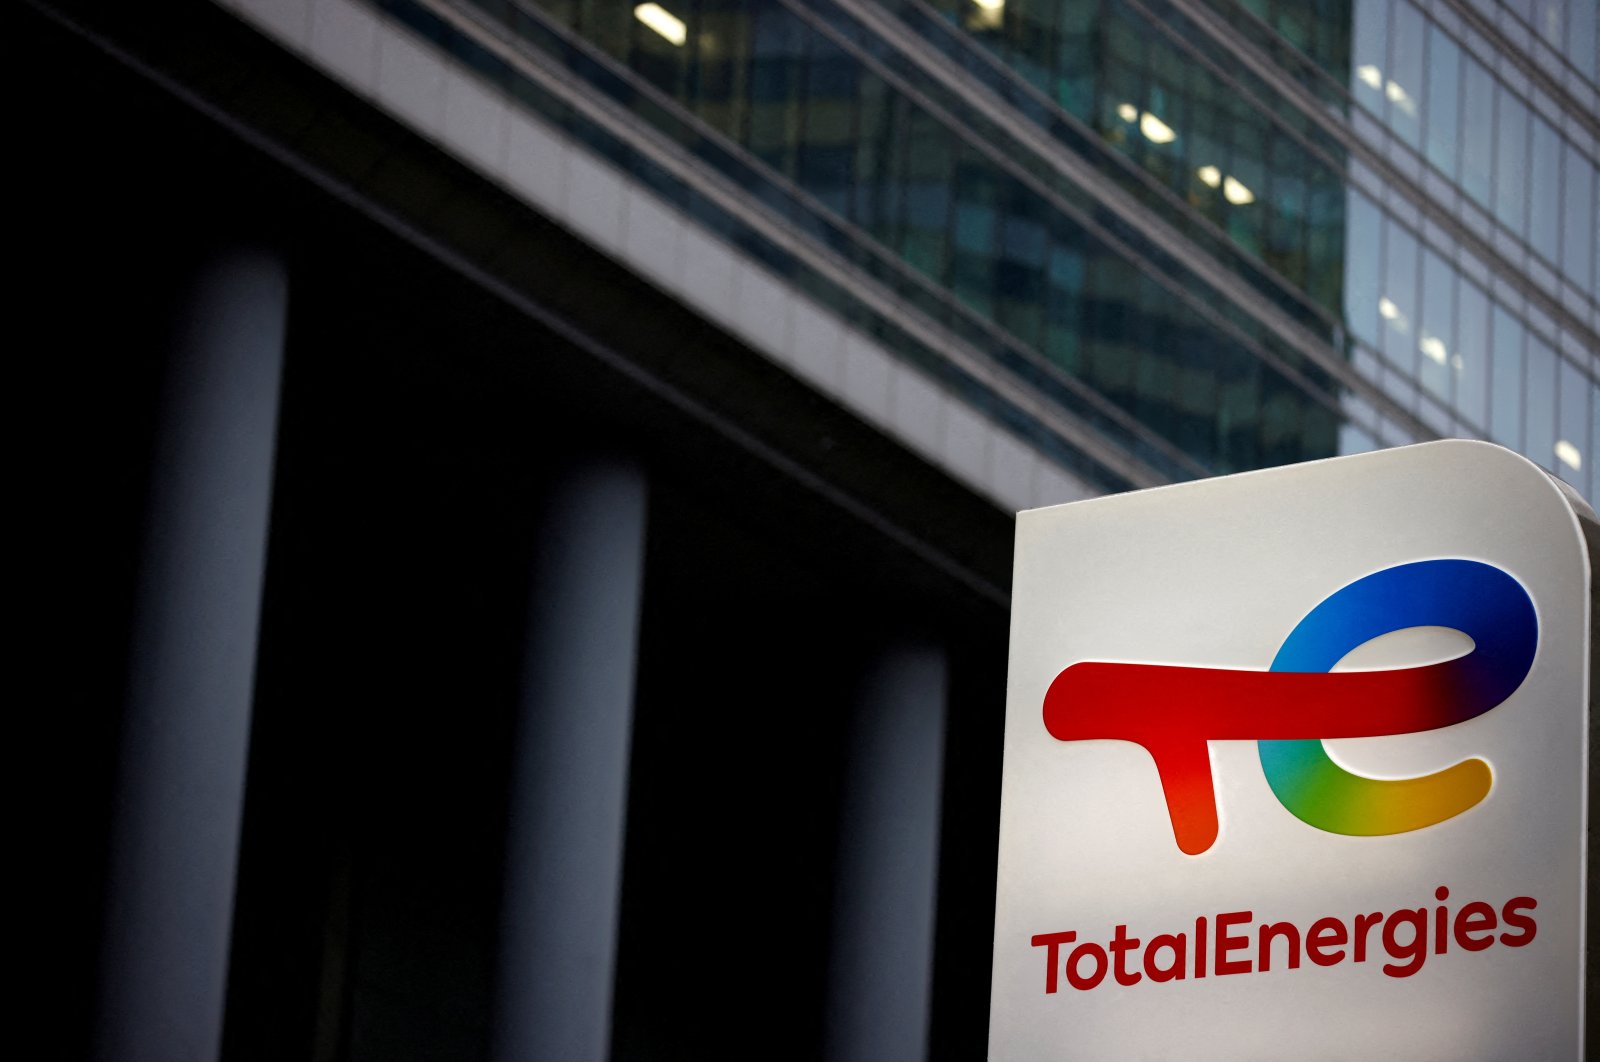 The logo of French oil and gas company TotalEnergies is pictured at an electric car charging station and petrol station at the financial and business district of La Defense in Courbevoie near Paris, France, June 22, 2021. (Reuters Photo)